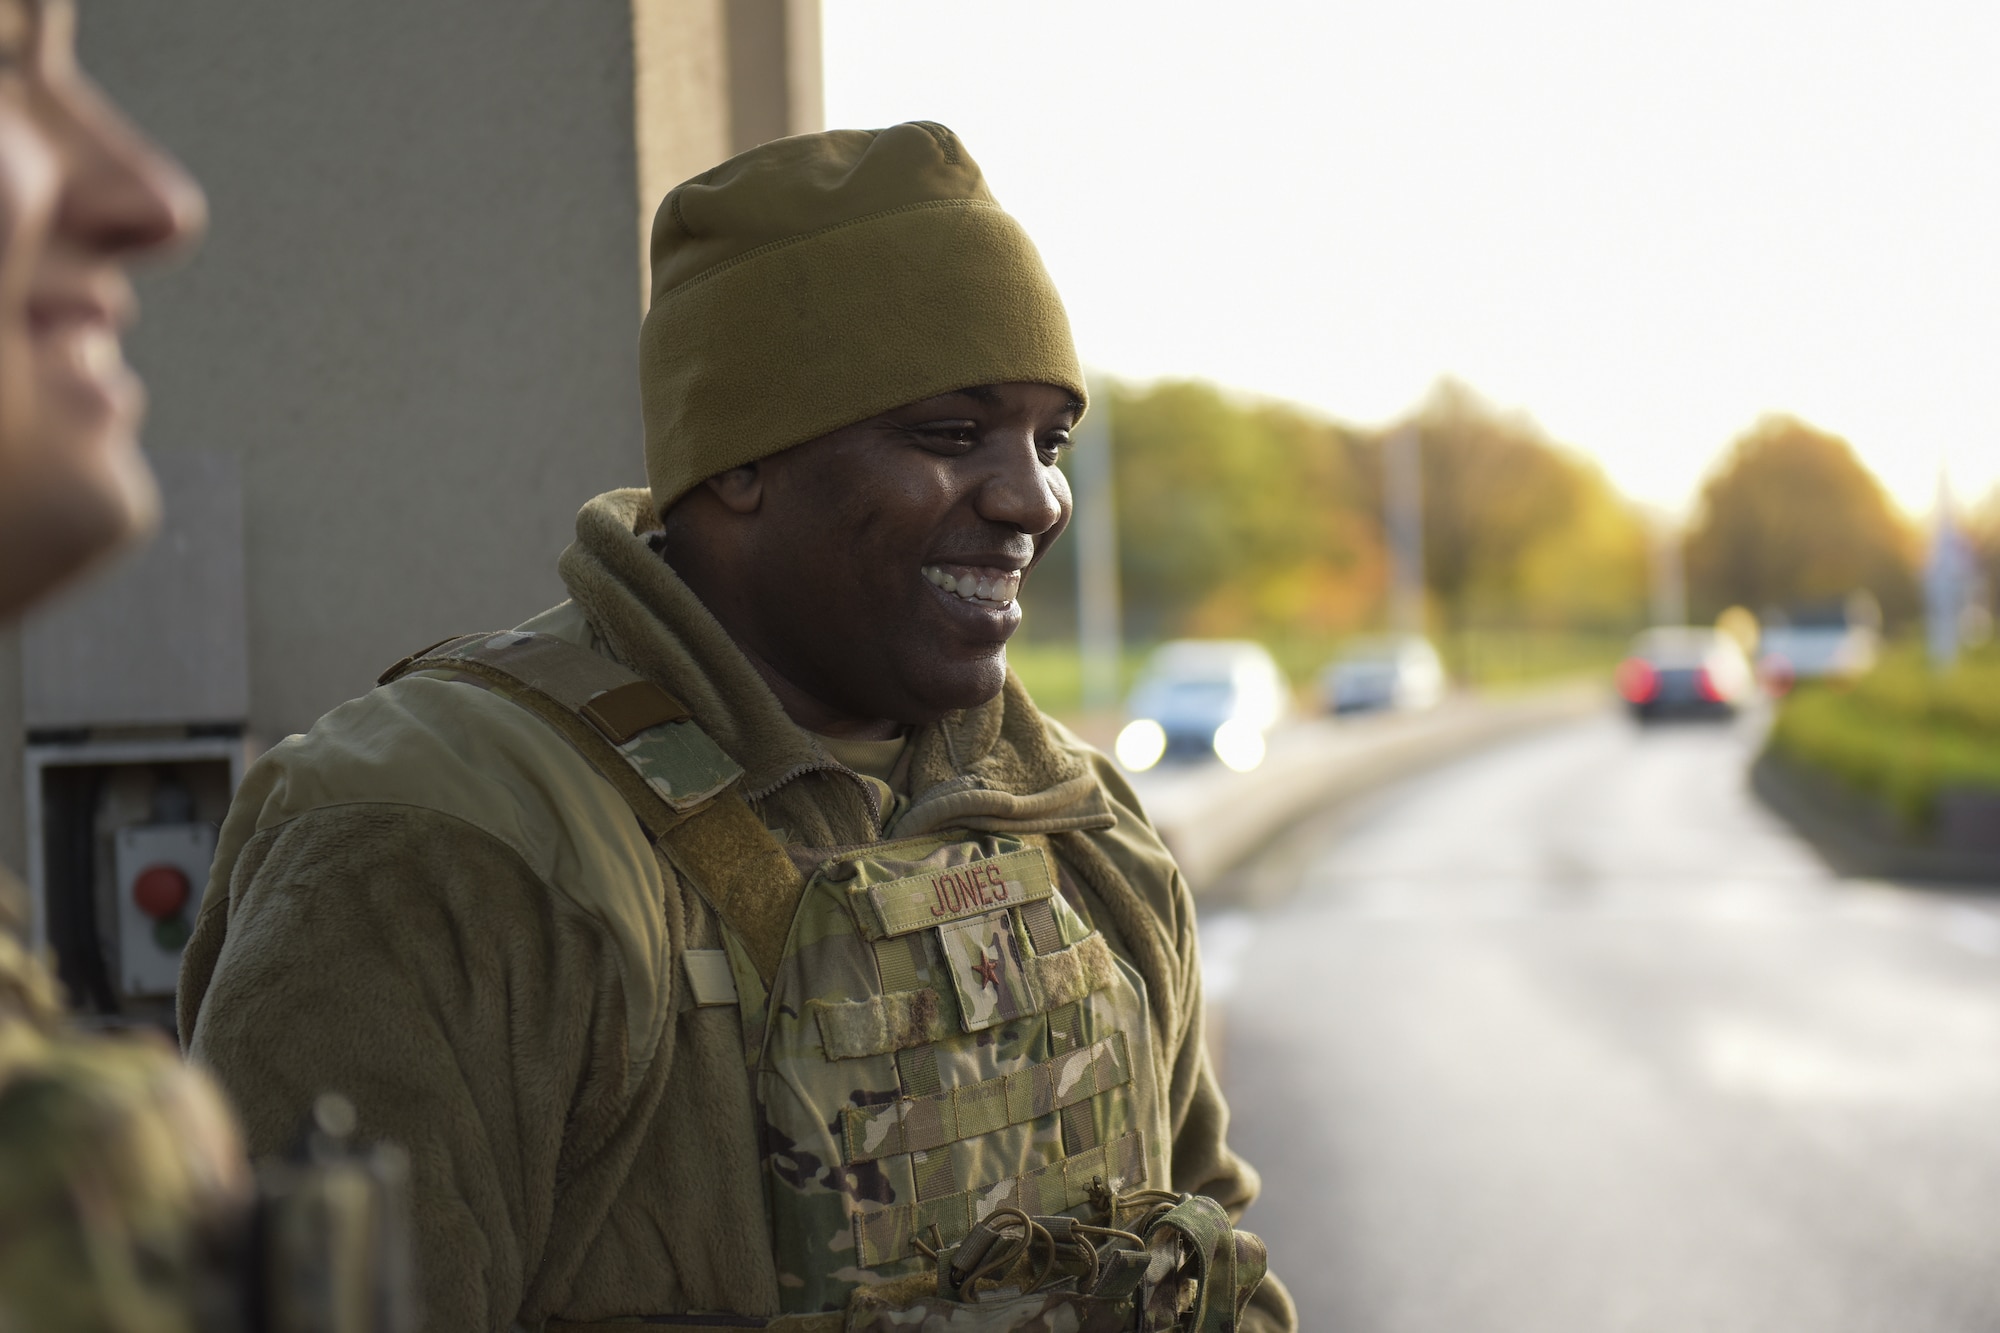 A man smiles while at a military gate